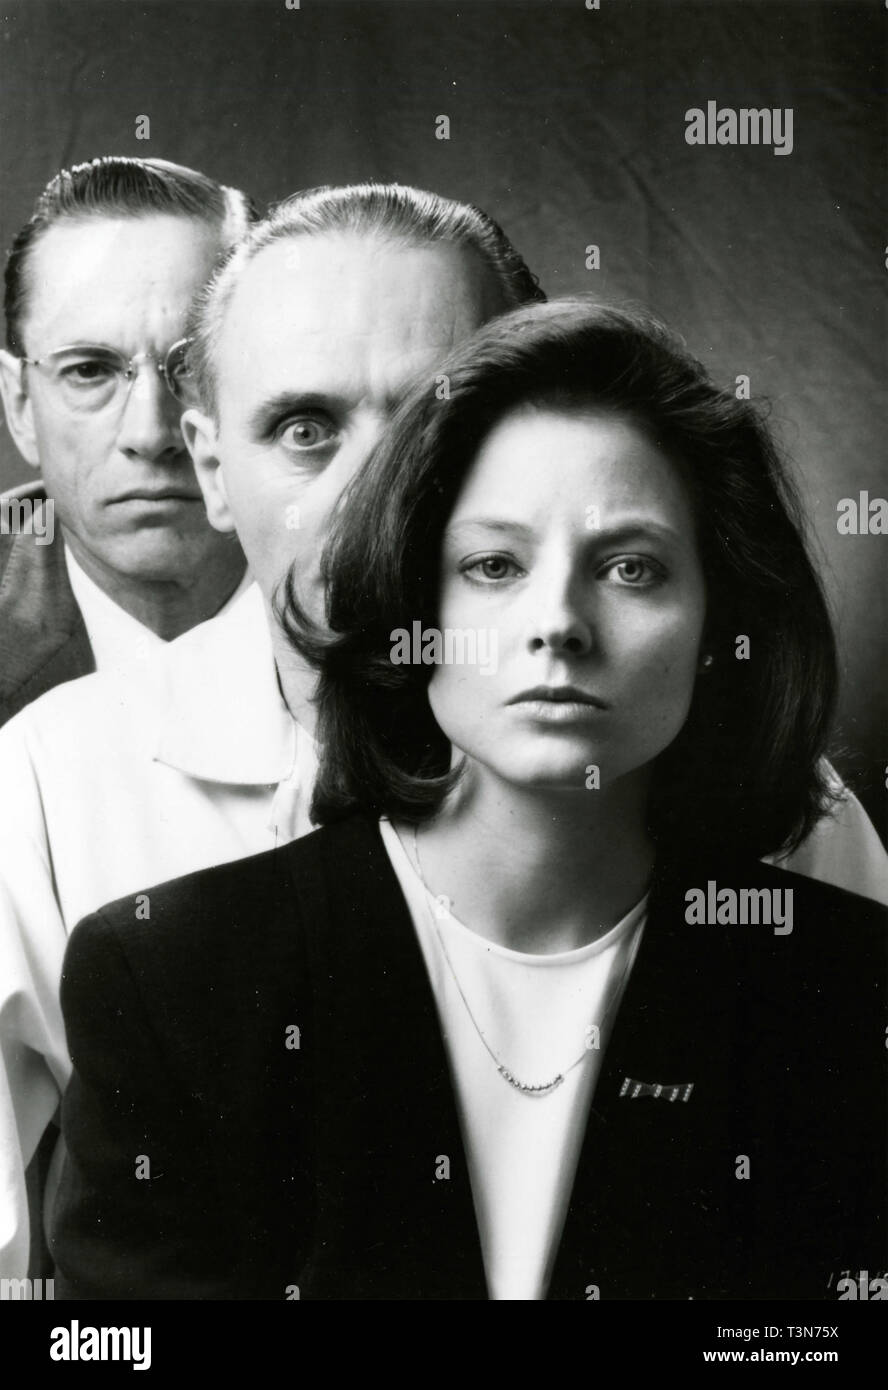 Scott Glenn, Anthony Hopkins, and Jodie Foster on the set of the movie The Silence of the Lambs, 1991 Stock Photo